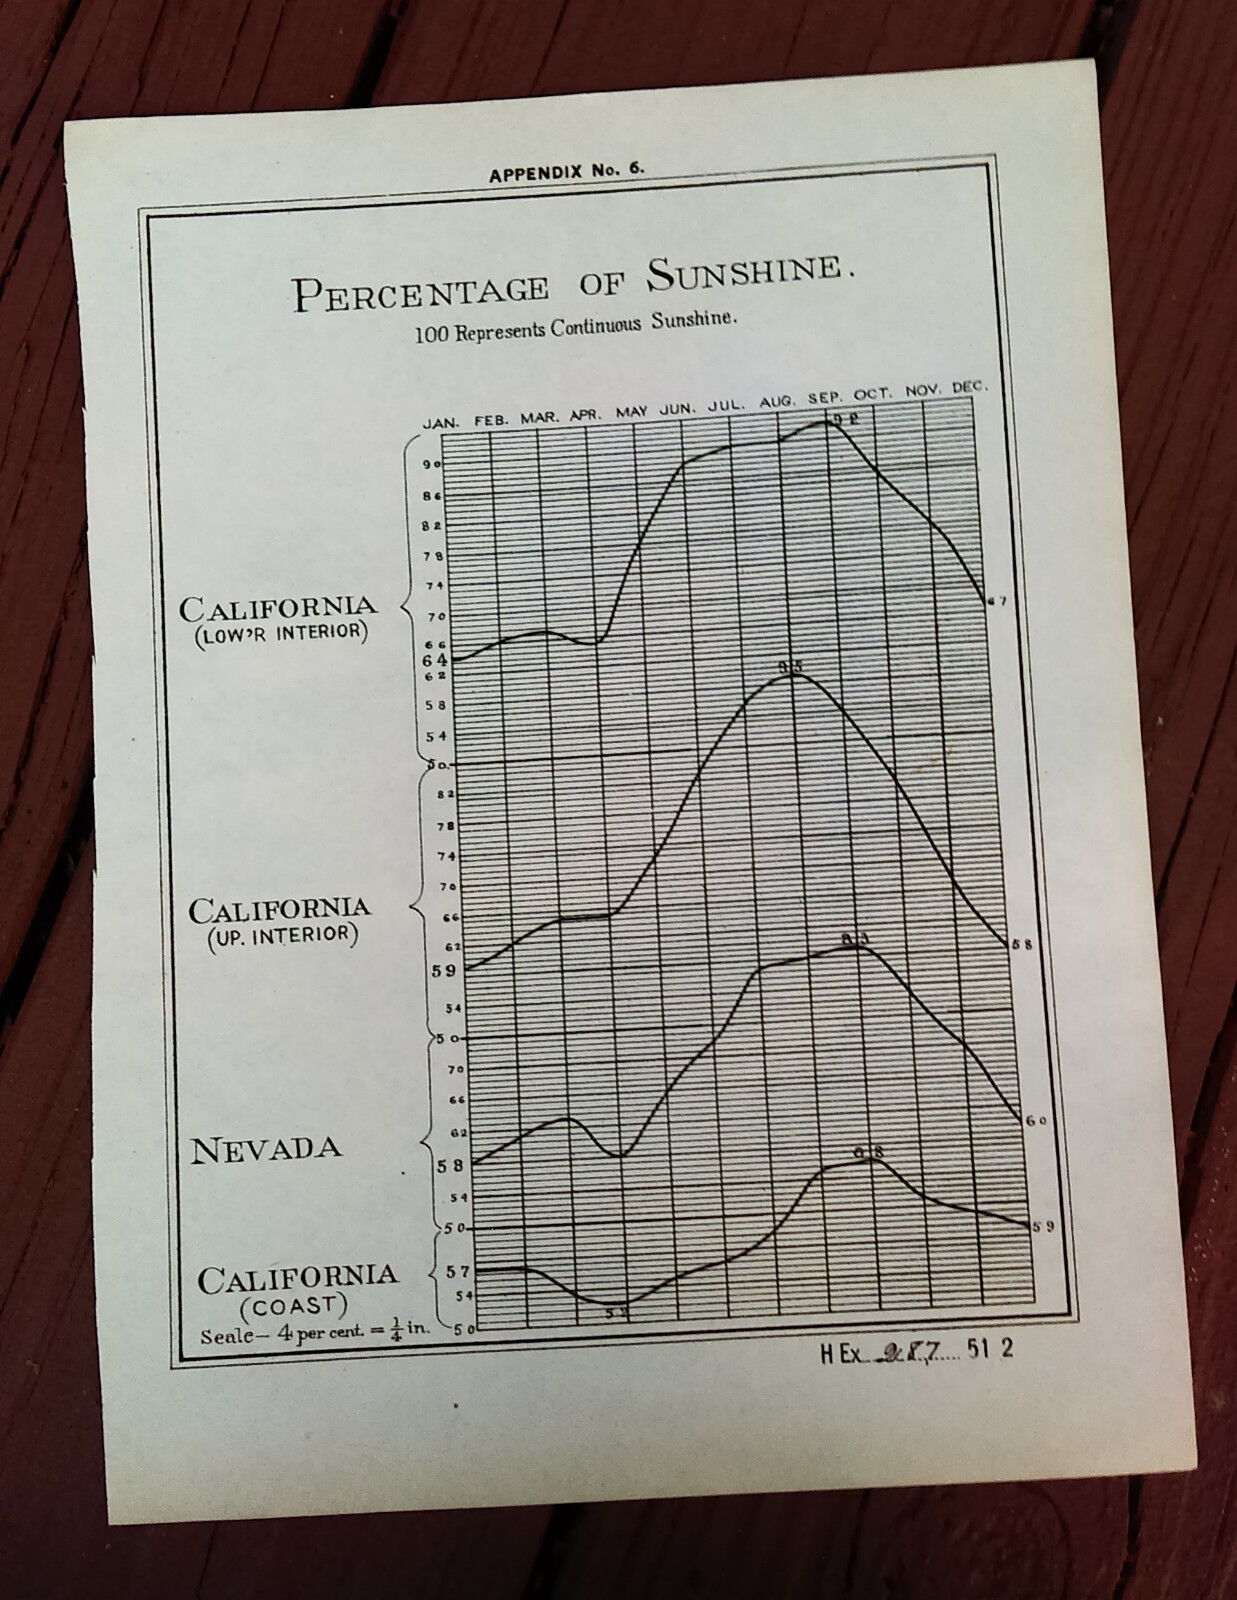 1891 Chart of Percentage of Sunshine in California and Nevada